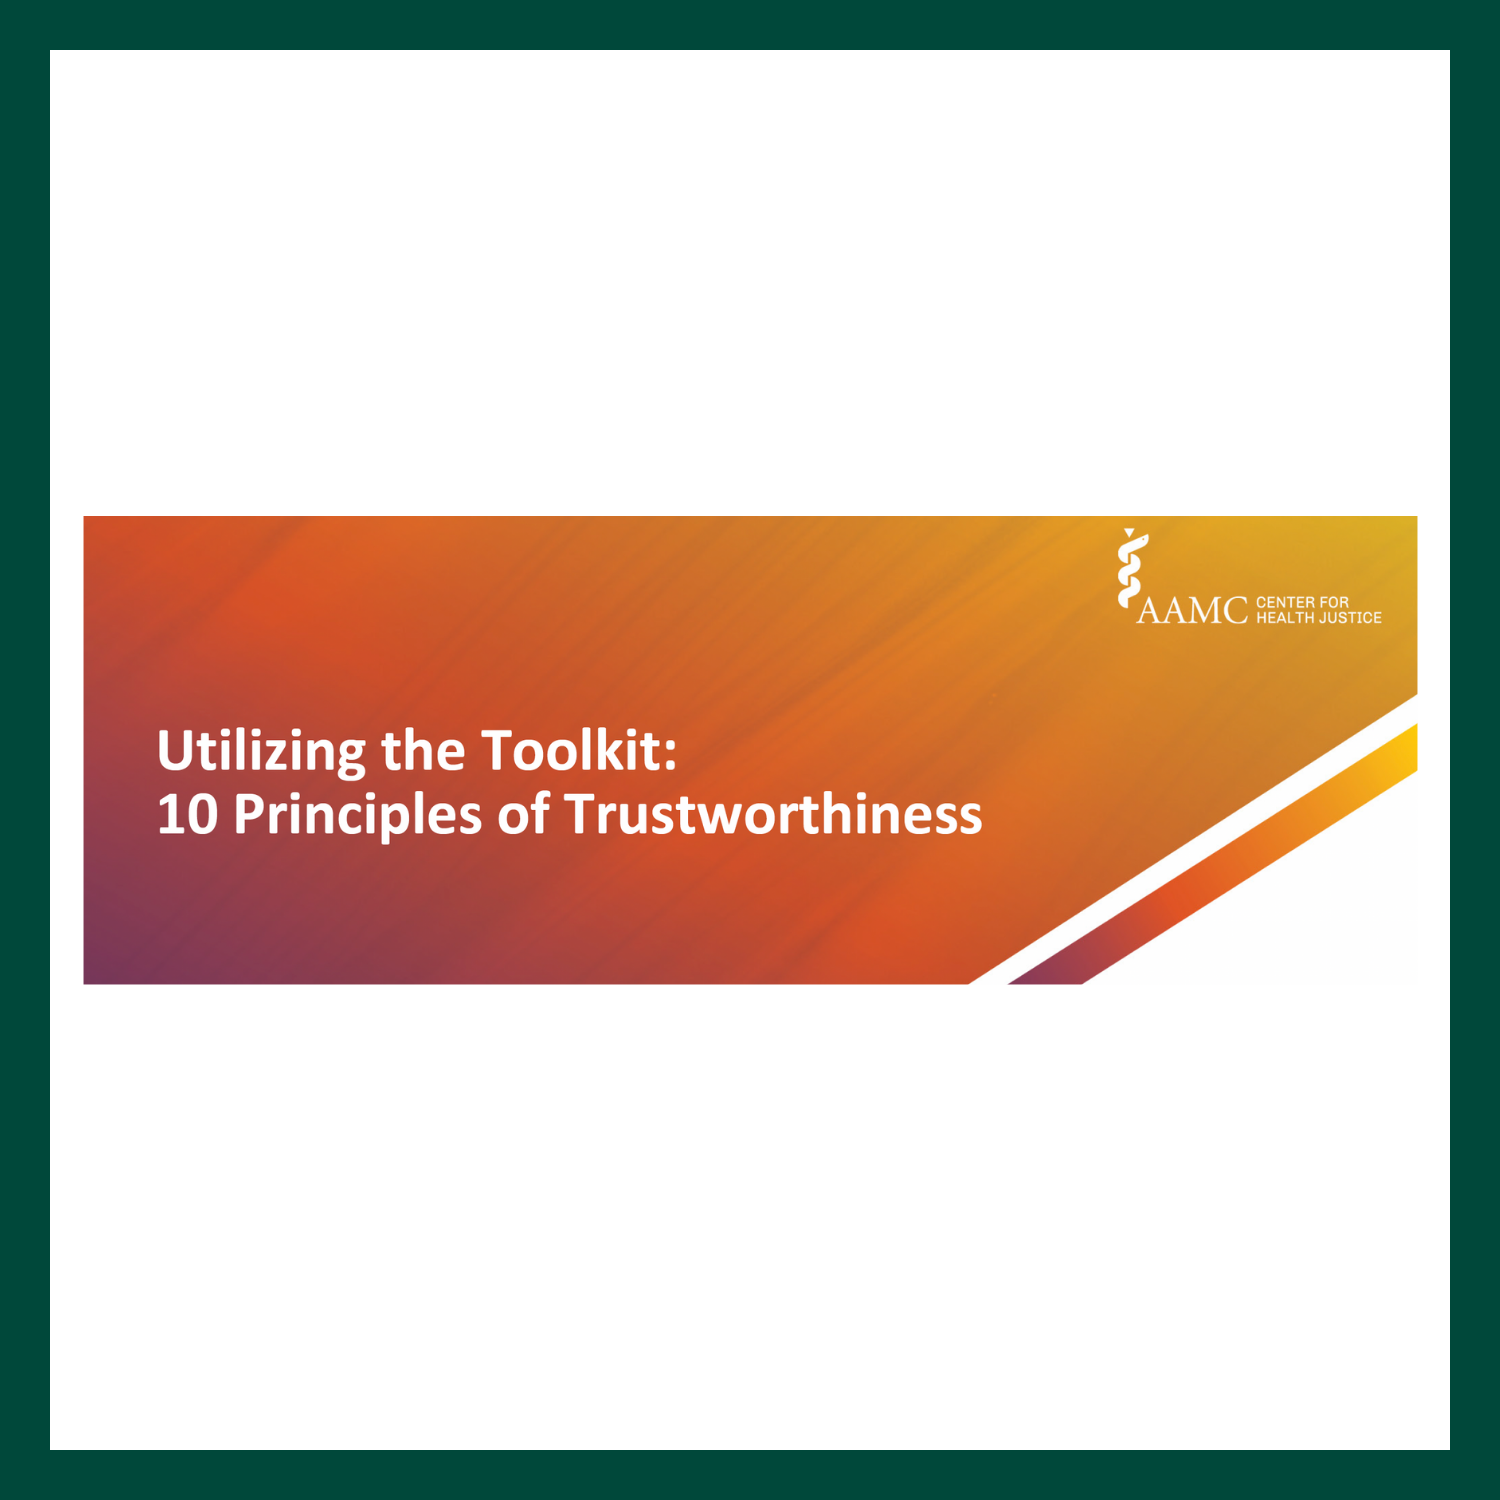 "Utilizing the Toolkit: 10 Principles of Trustworthiness" written in white with an ombre background including orange, purple, and yellow.